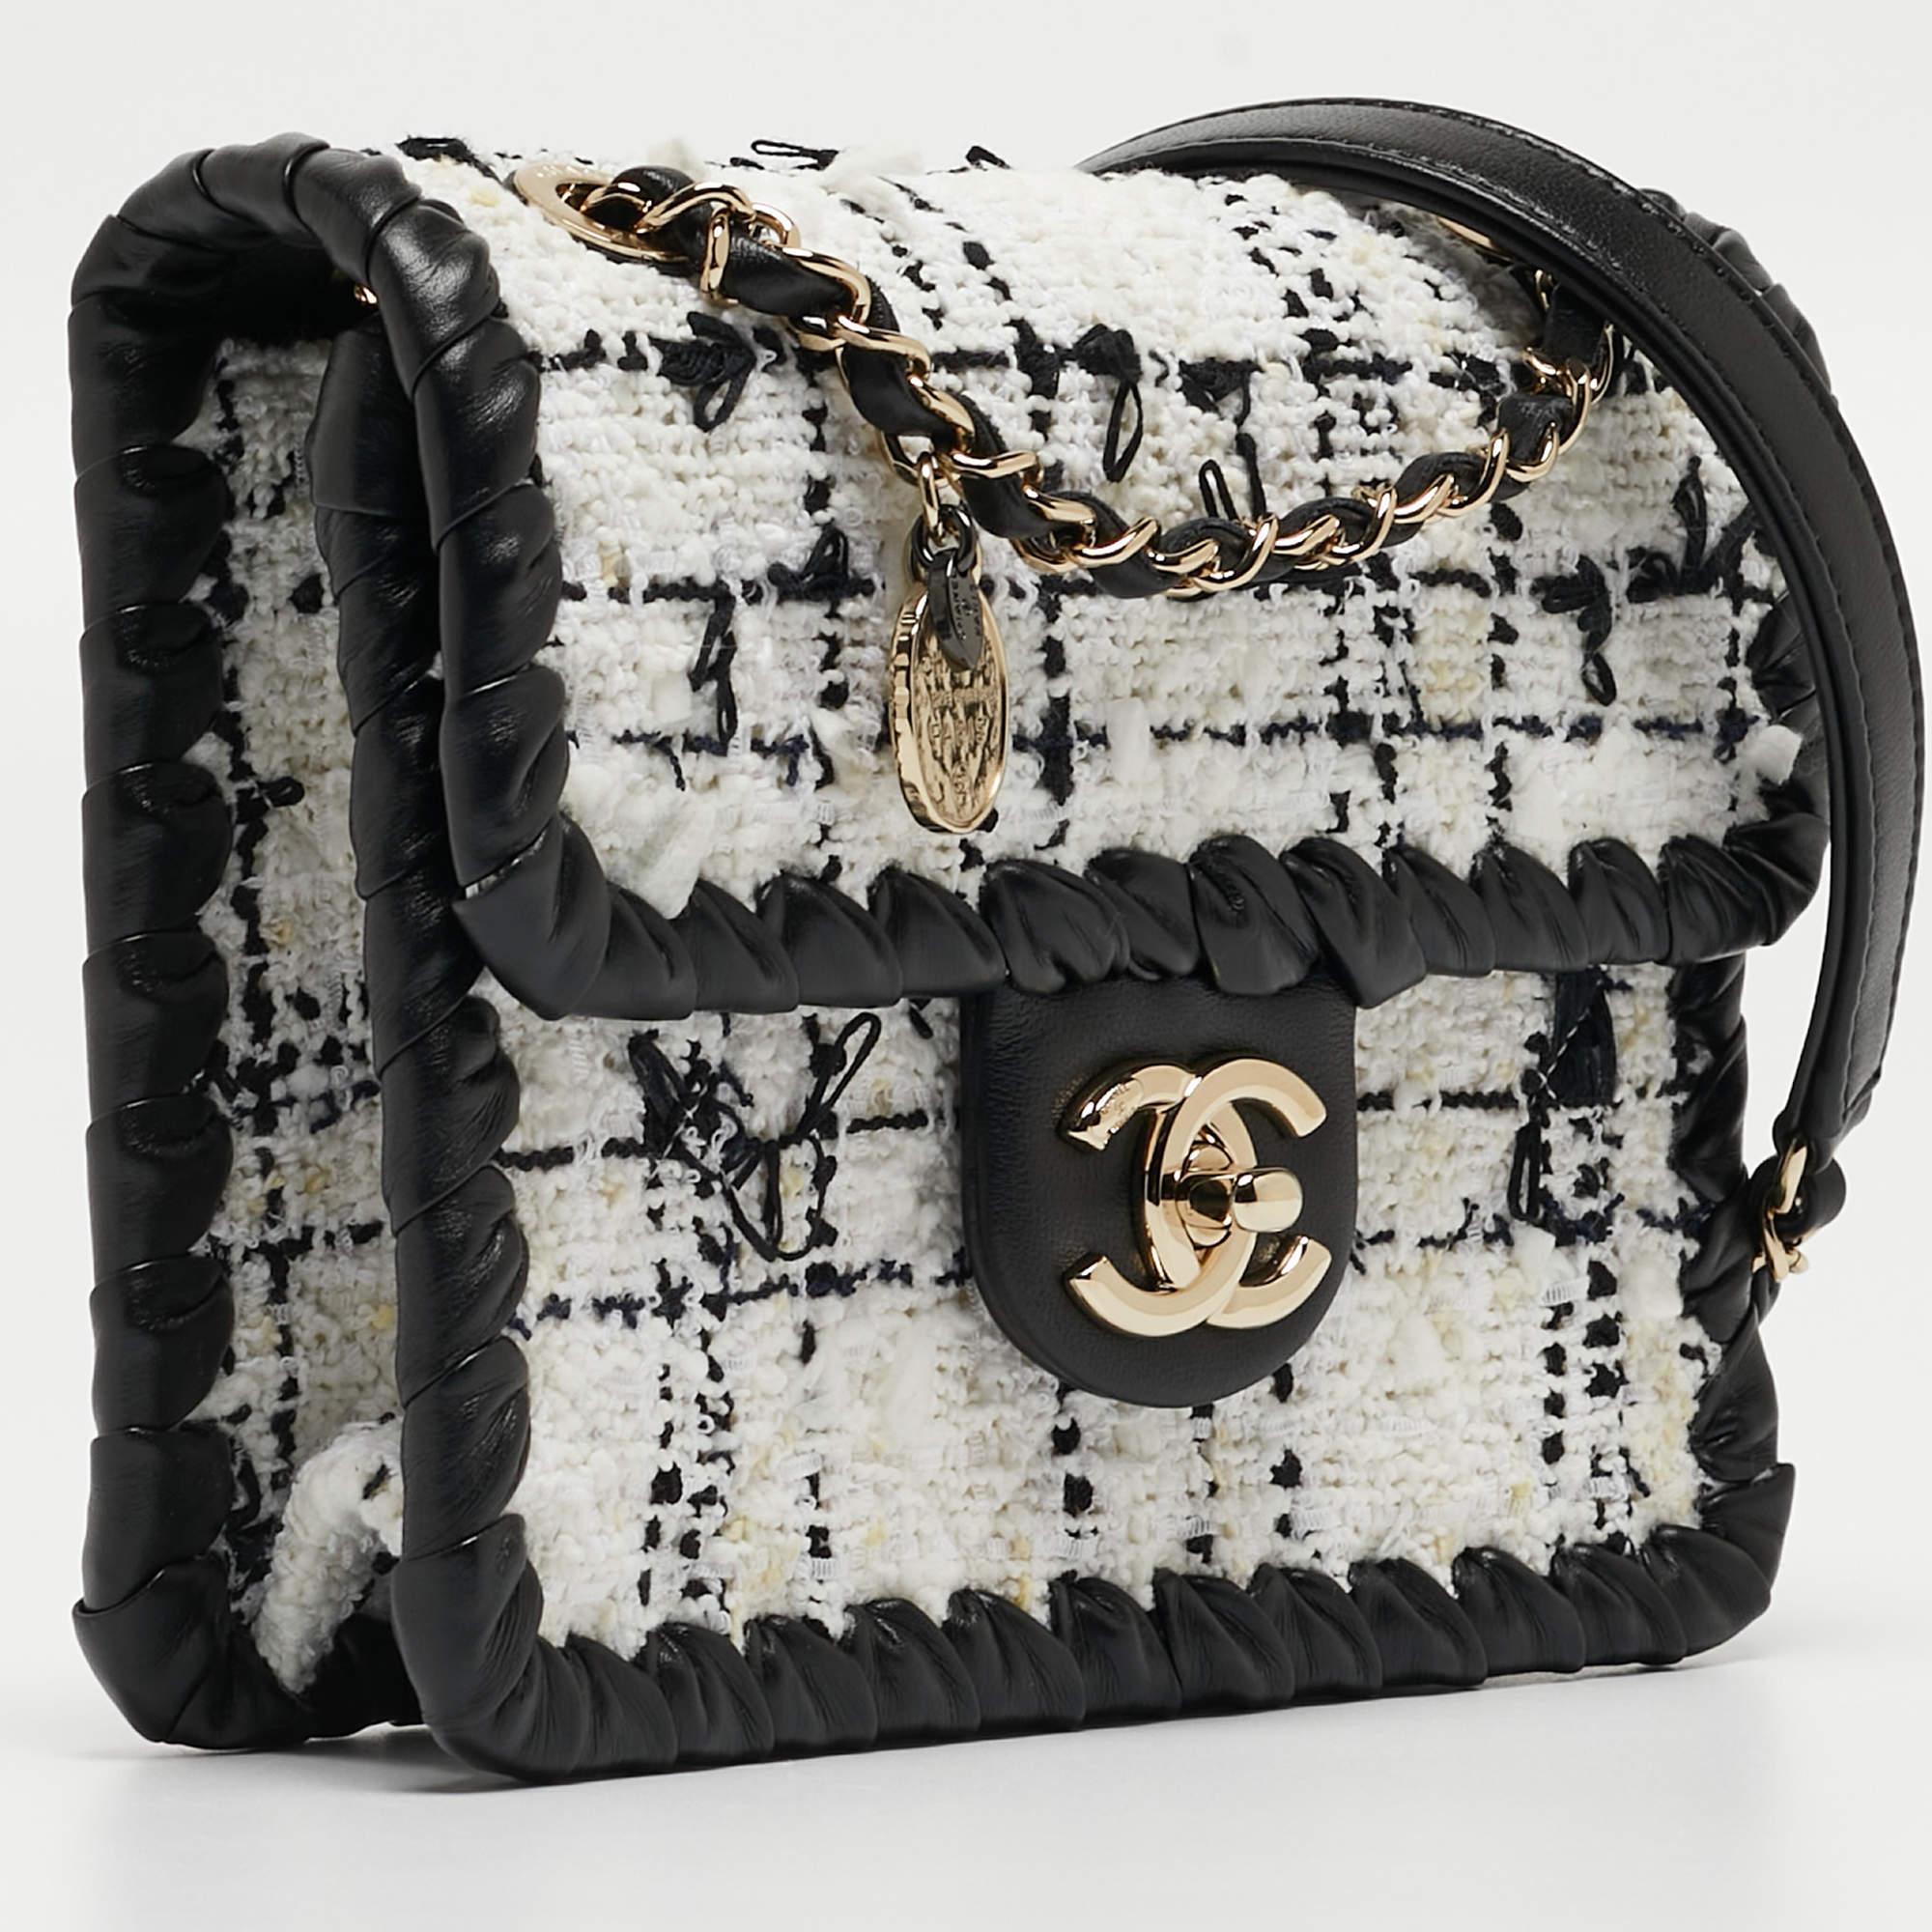 Chanel Black/White Tweed and Leather Mini My Own Frame Flap Bag For Sale 7